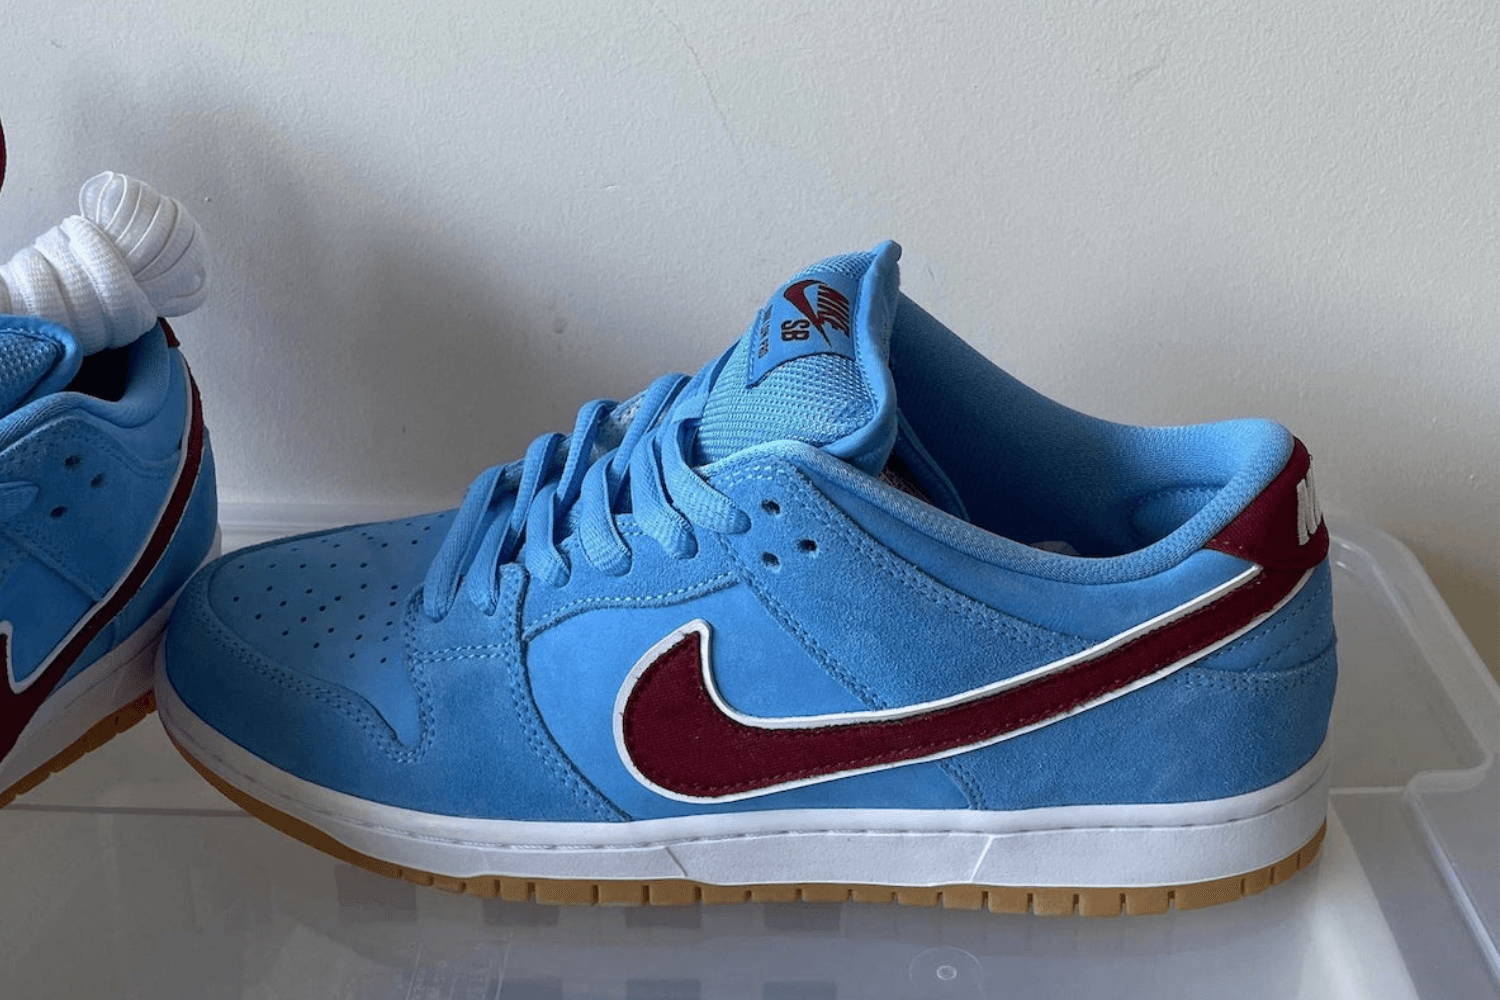 Take a look at the upcoming Nike SB Dunk Low 'Phillies'